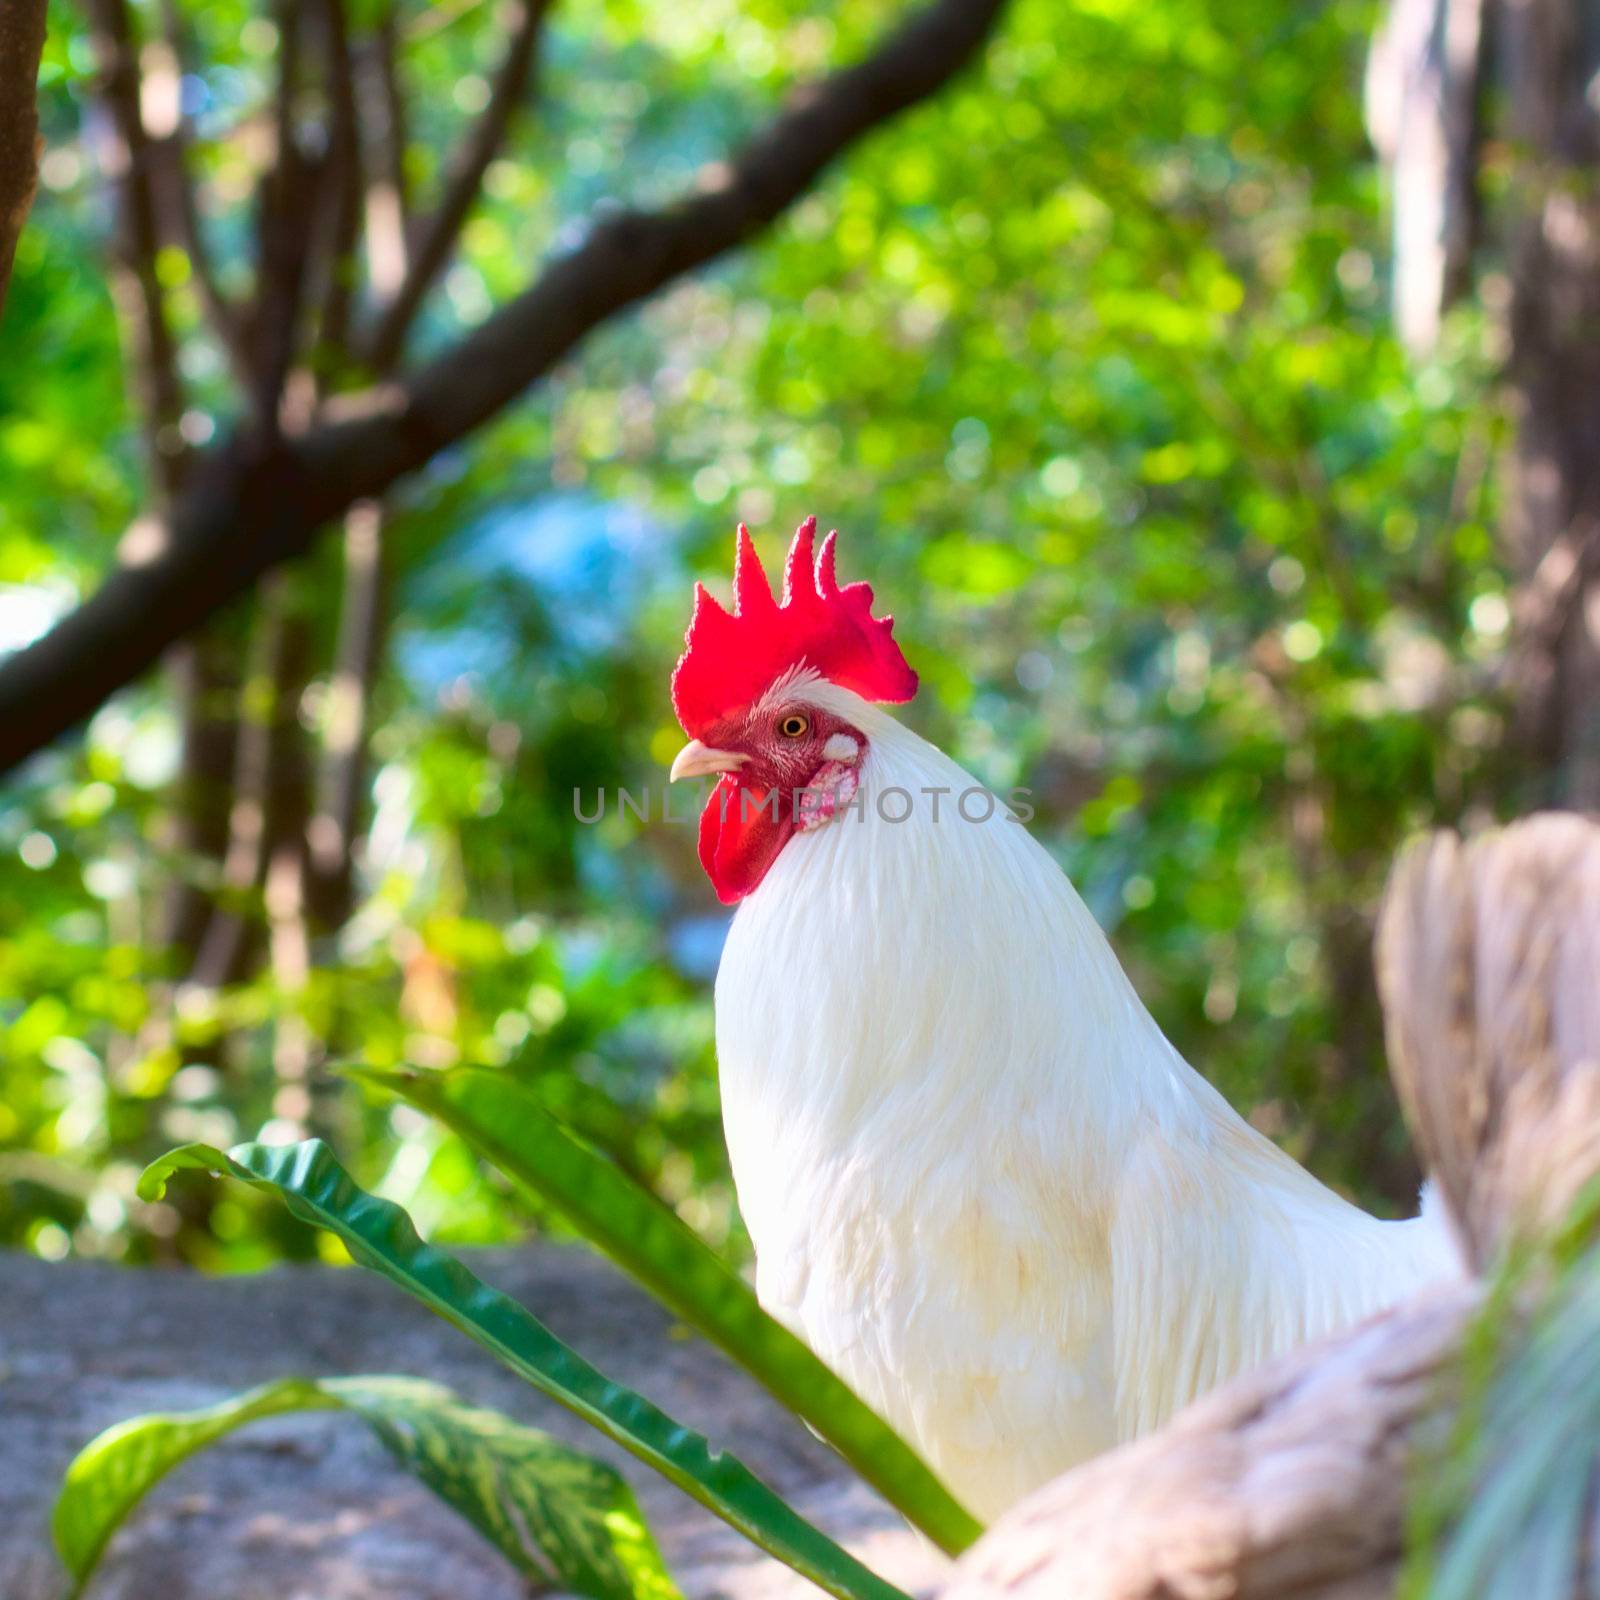 White Rooster by petr_malyshev